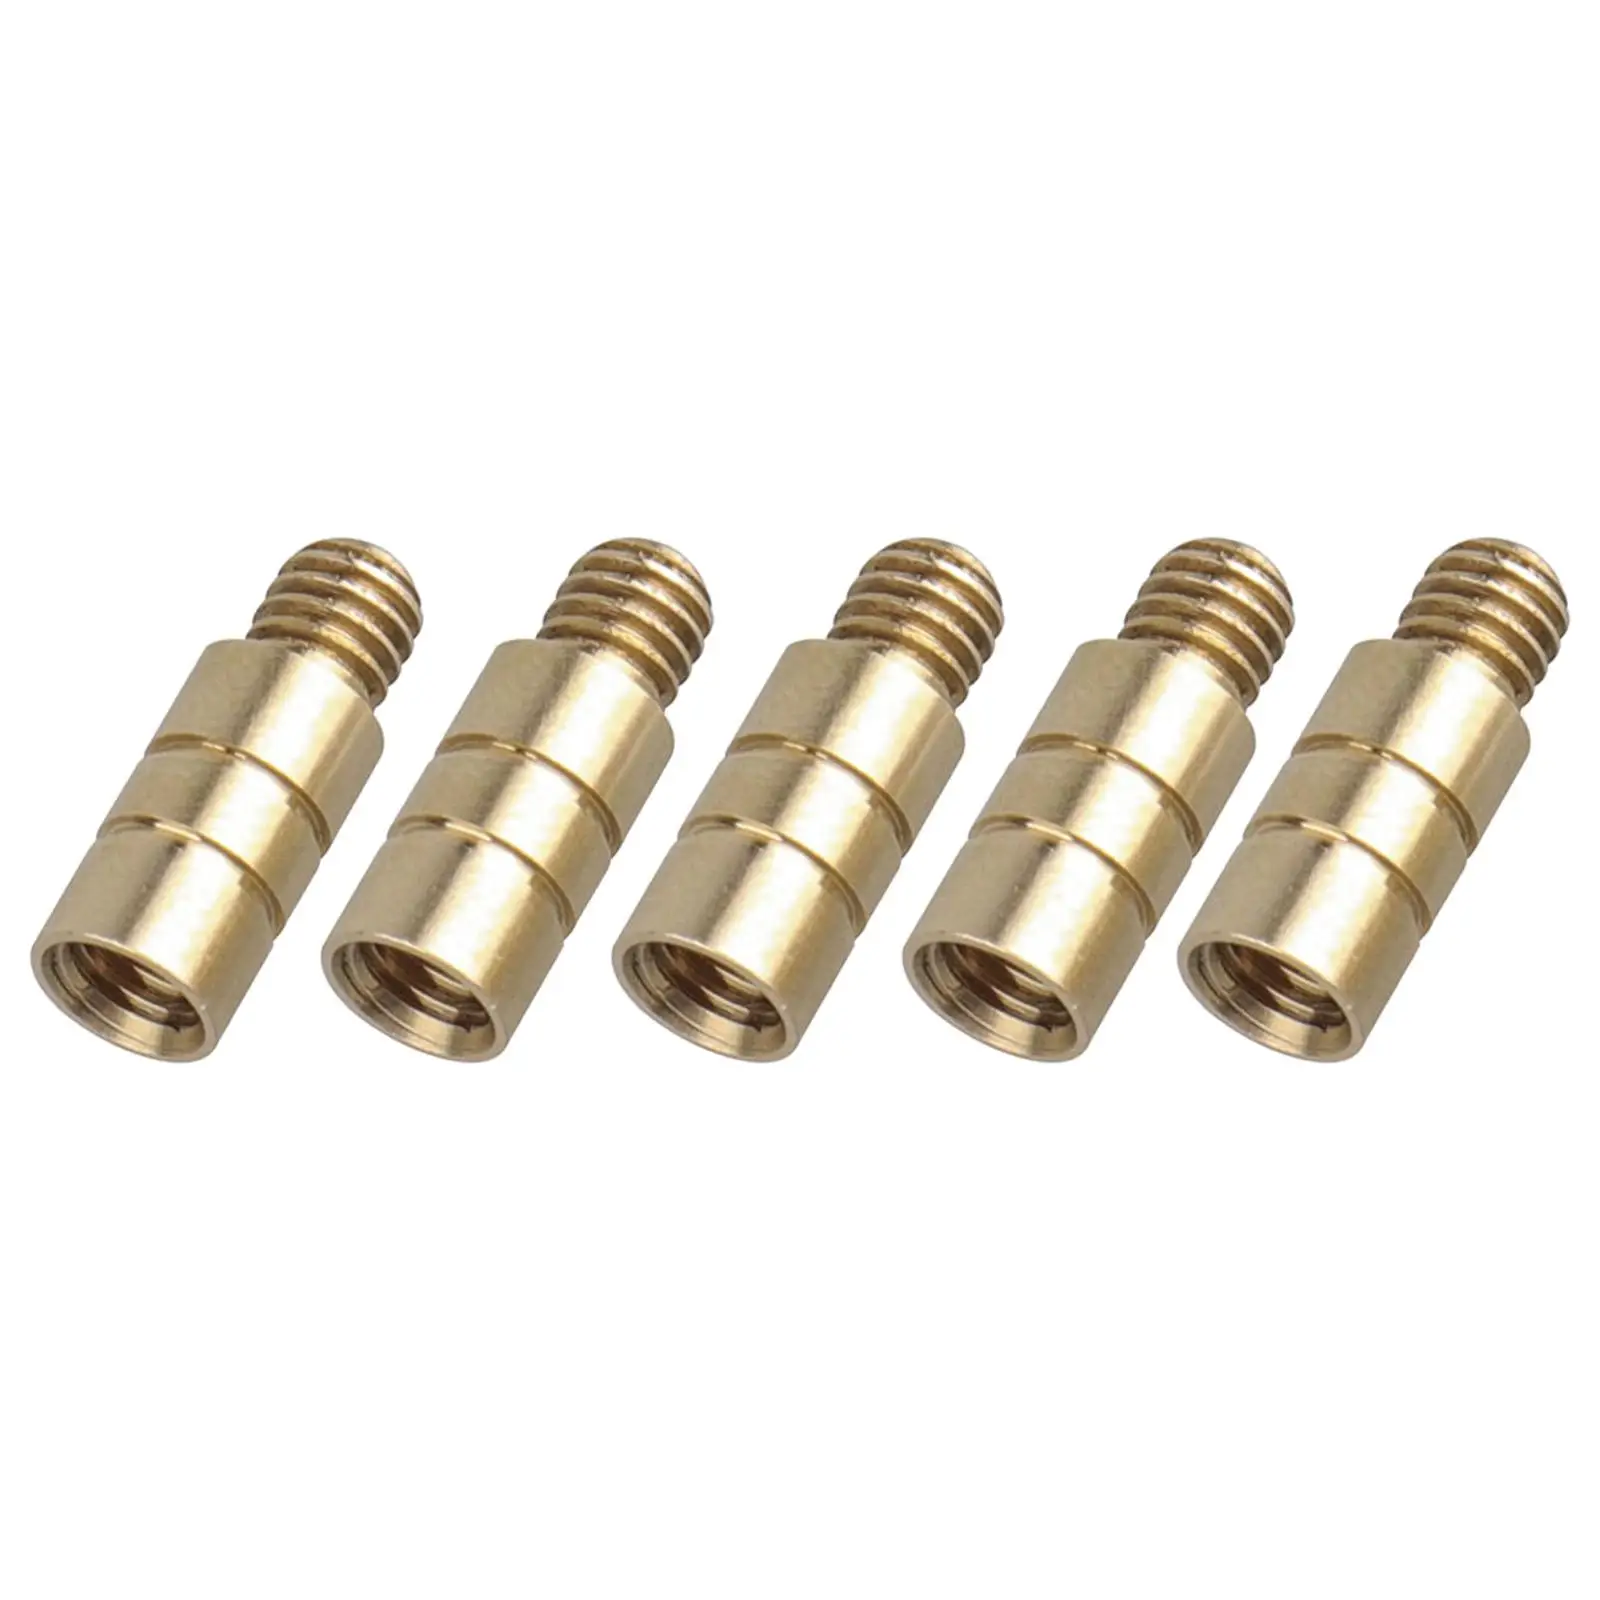 5Pcs Professional Darts Weights 2BA Pole Hardware Fittings Add for Soft and Steel Darts